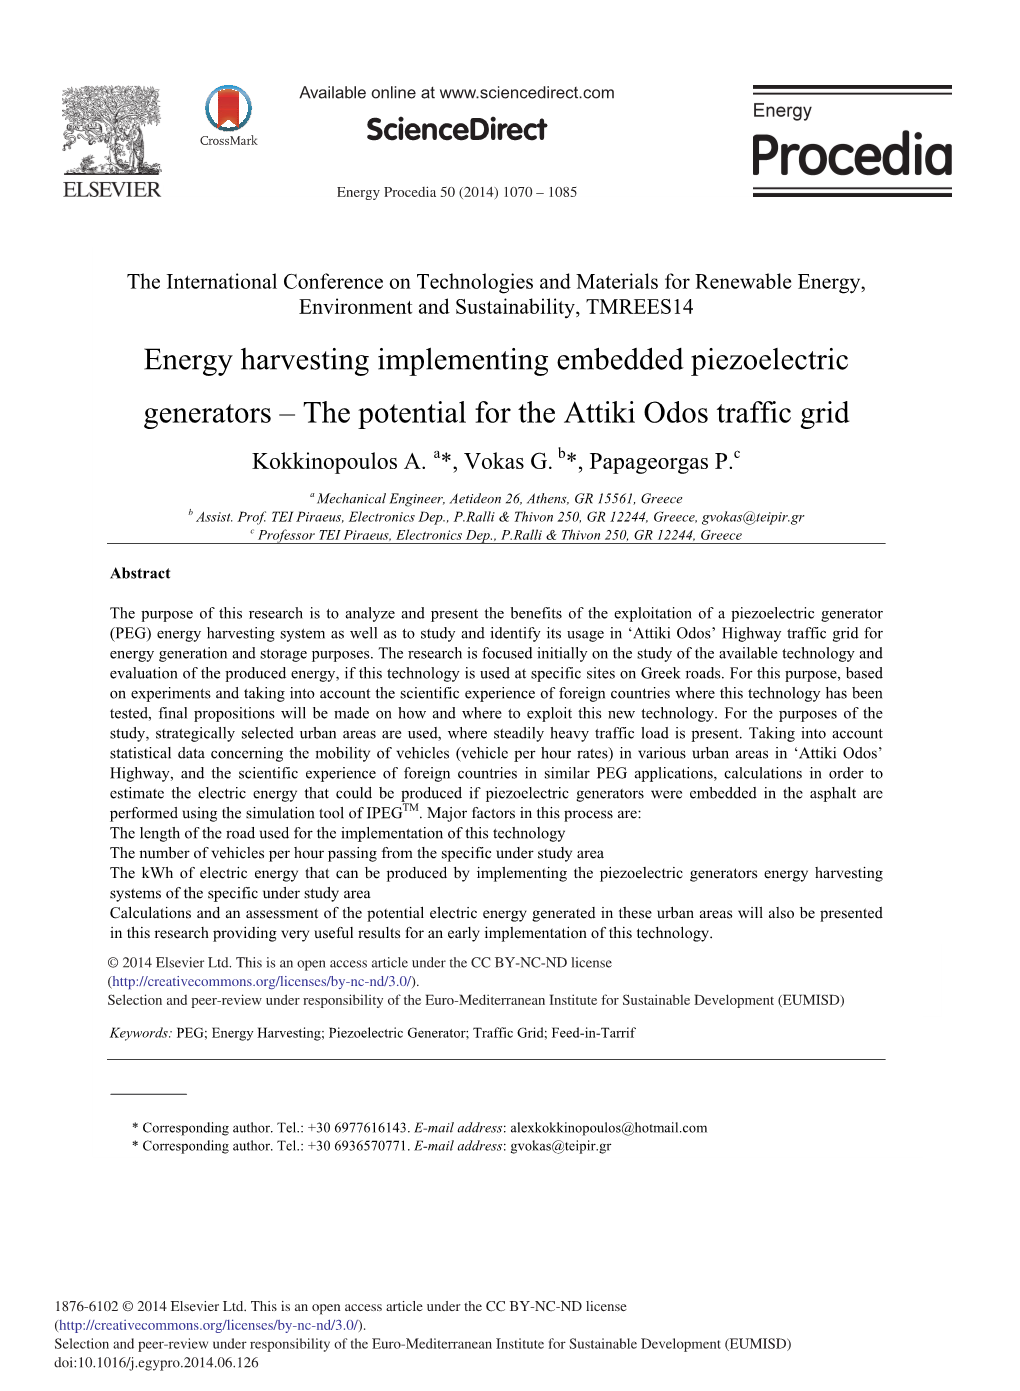 Energy Harvesting Implementing Embedded Piezoelectric Generators – the Potential for the Attiki Odos Traffic Grid Kokkinopoulos A